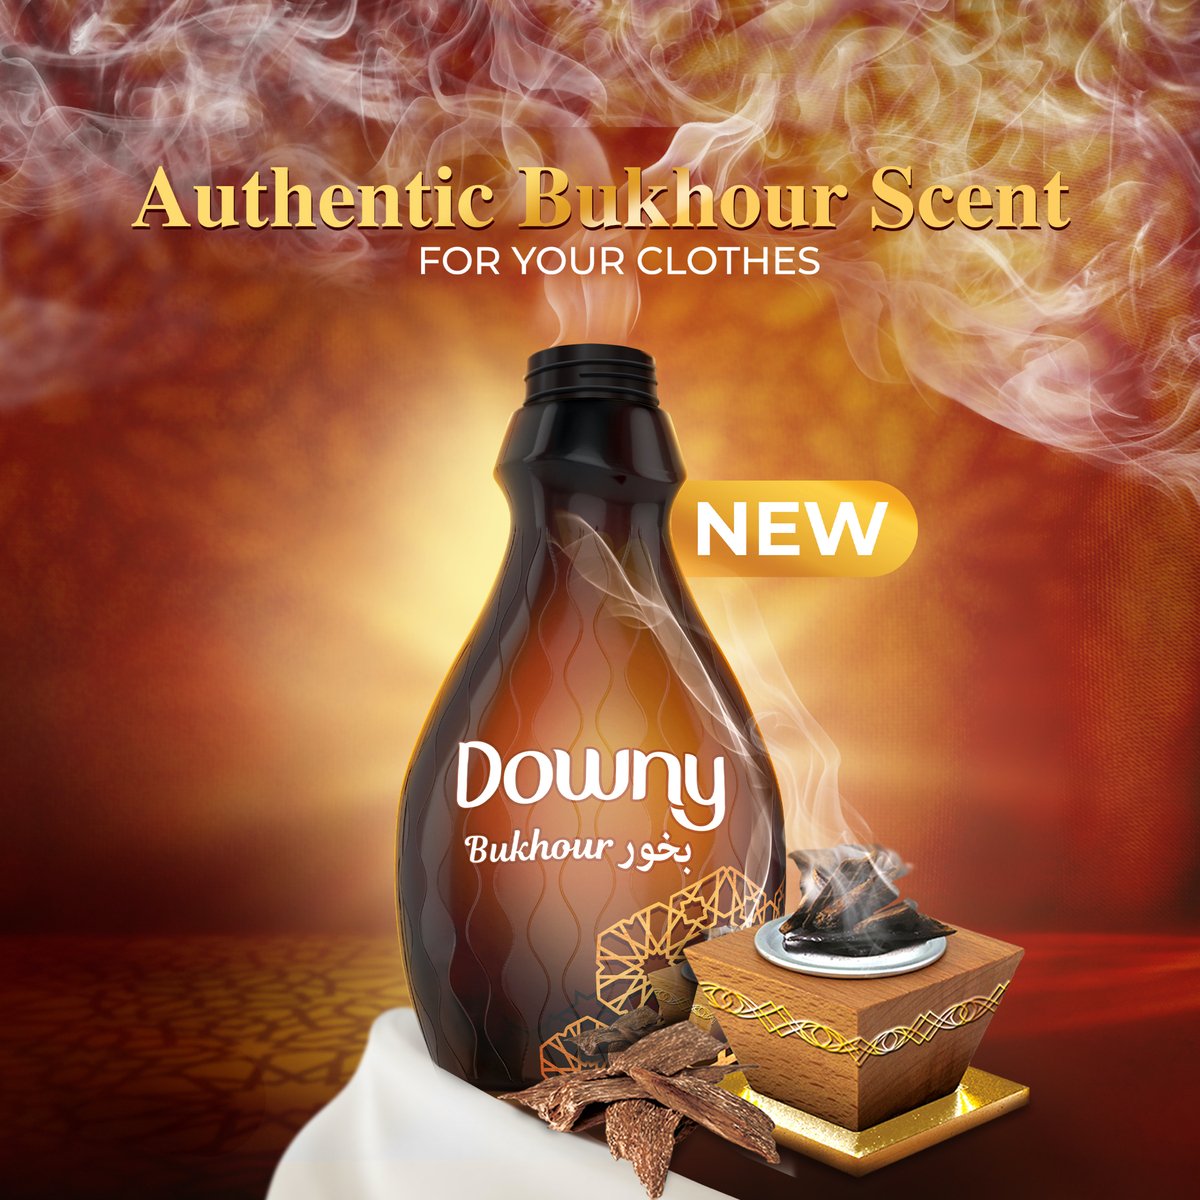 Downy Arabian Rituals Bukhour Fabric Softener For Up to 46 Washes 1.84Litre